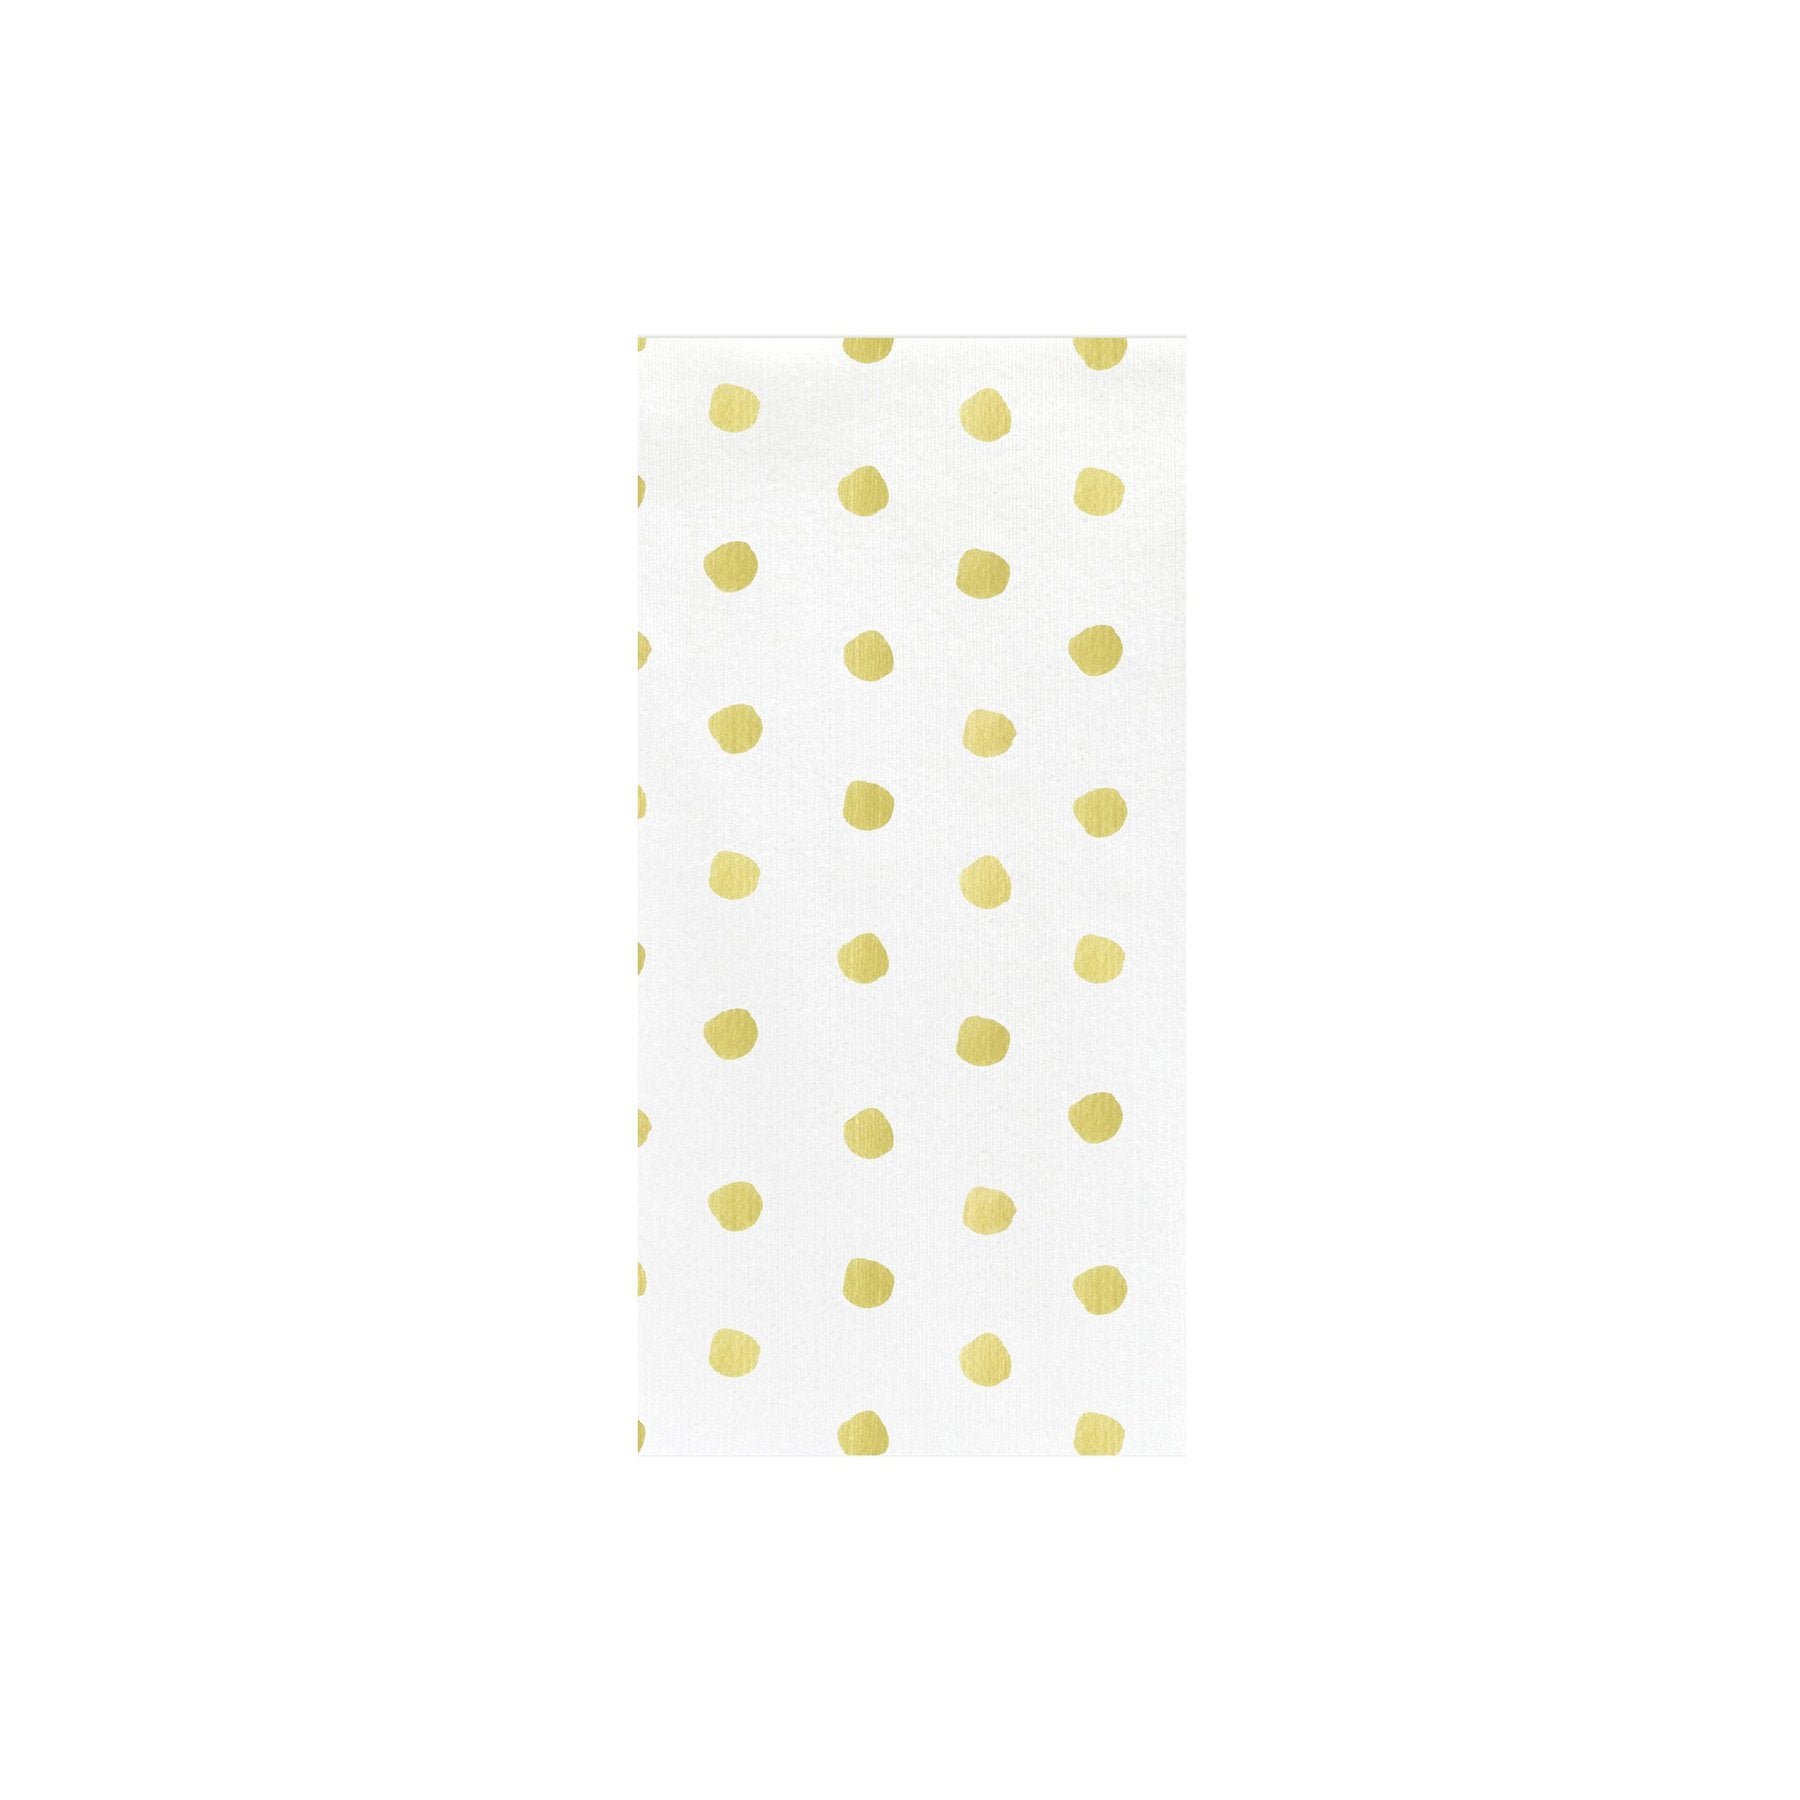 Papersoft Napkins Yellow Dot Guest Towels - Pack of 20